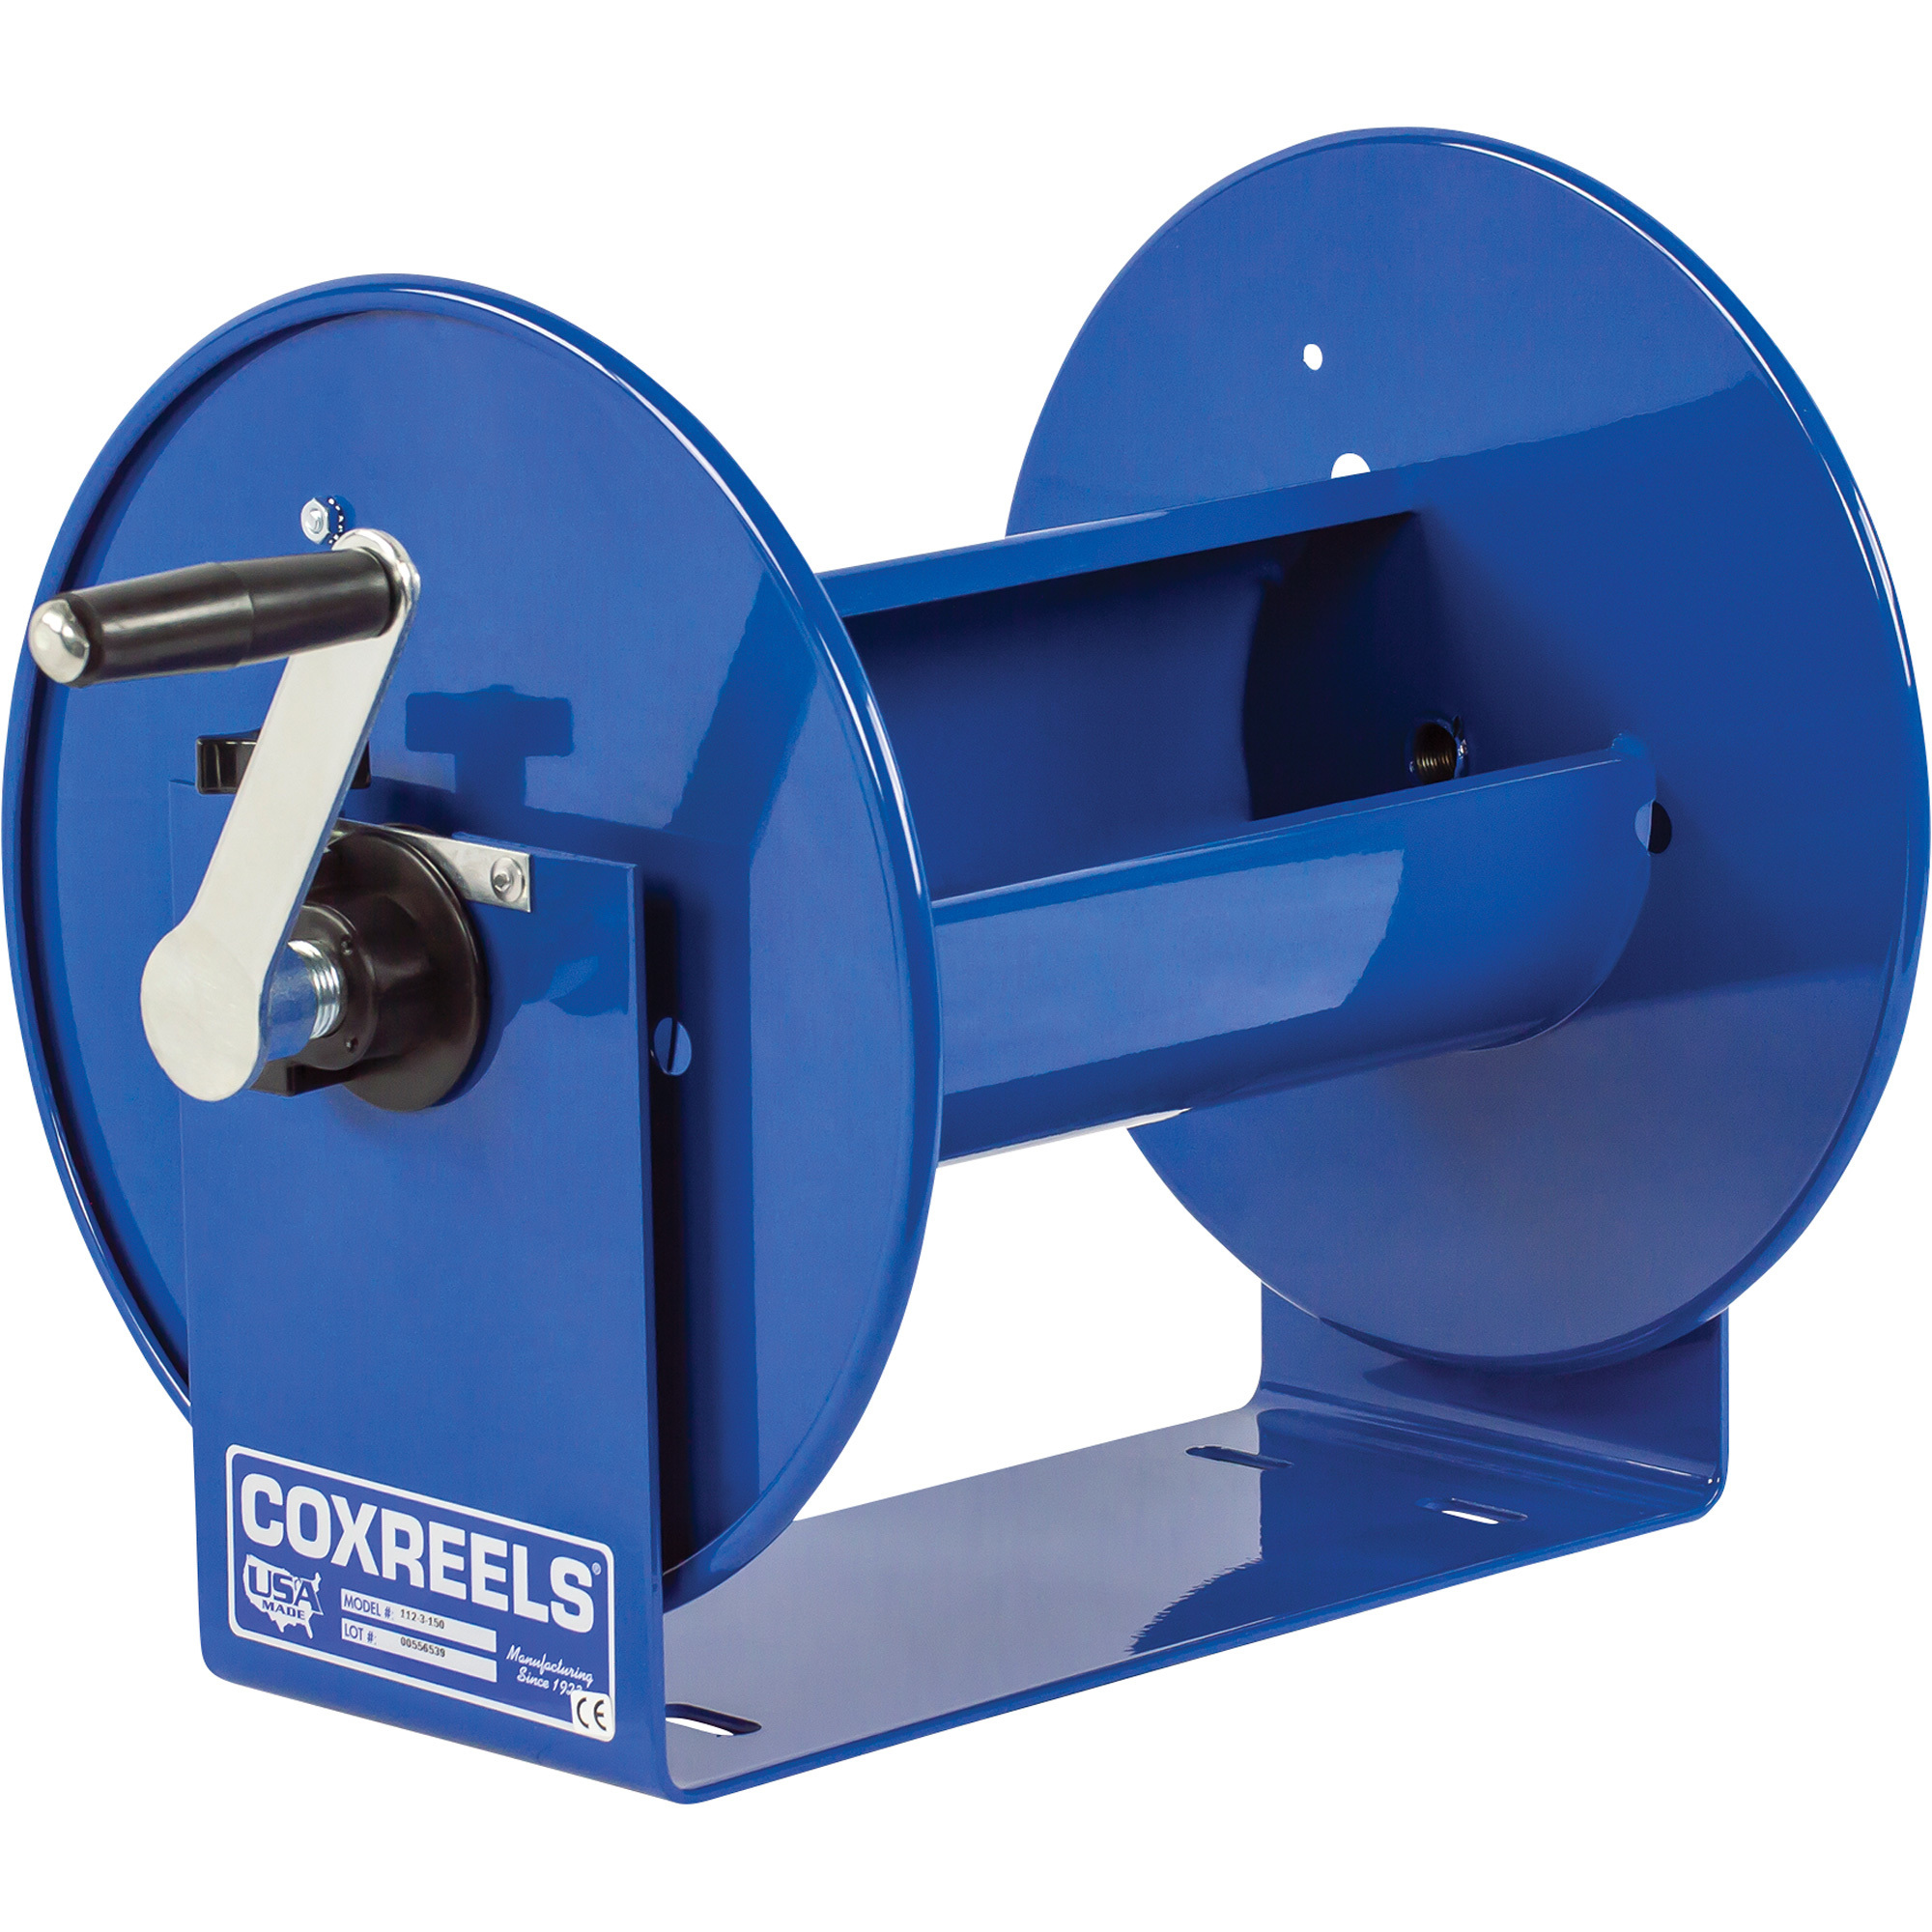 Coxreels Steel Pressure Washer Hose Reel, 4,000 PSI, 150ft. x 3/8Inch Capacity